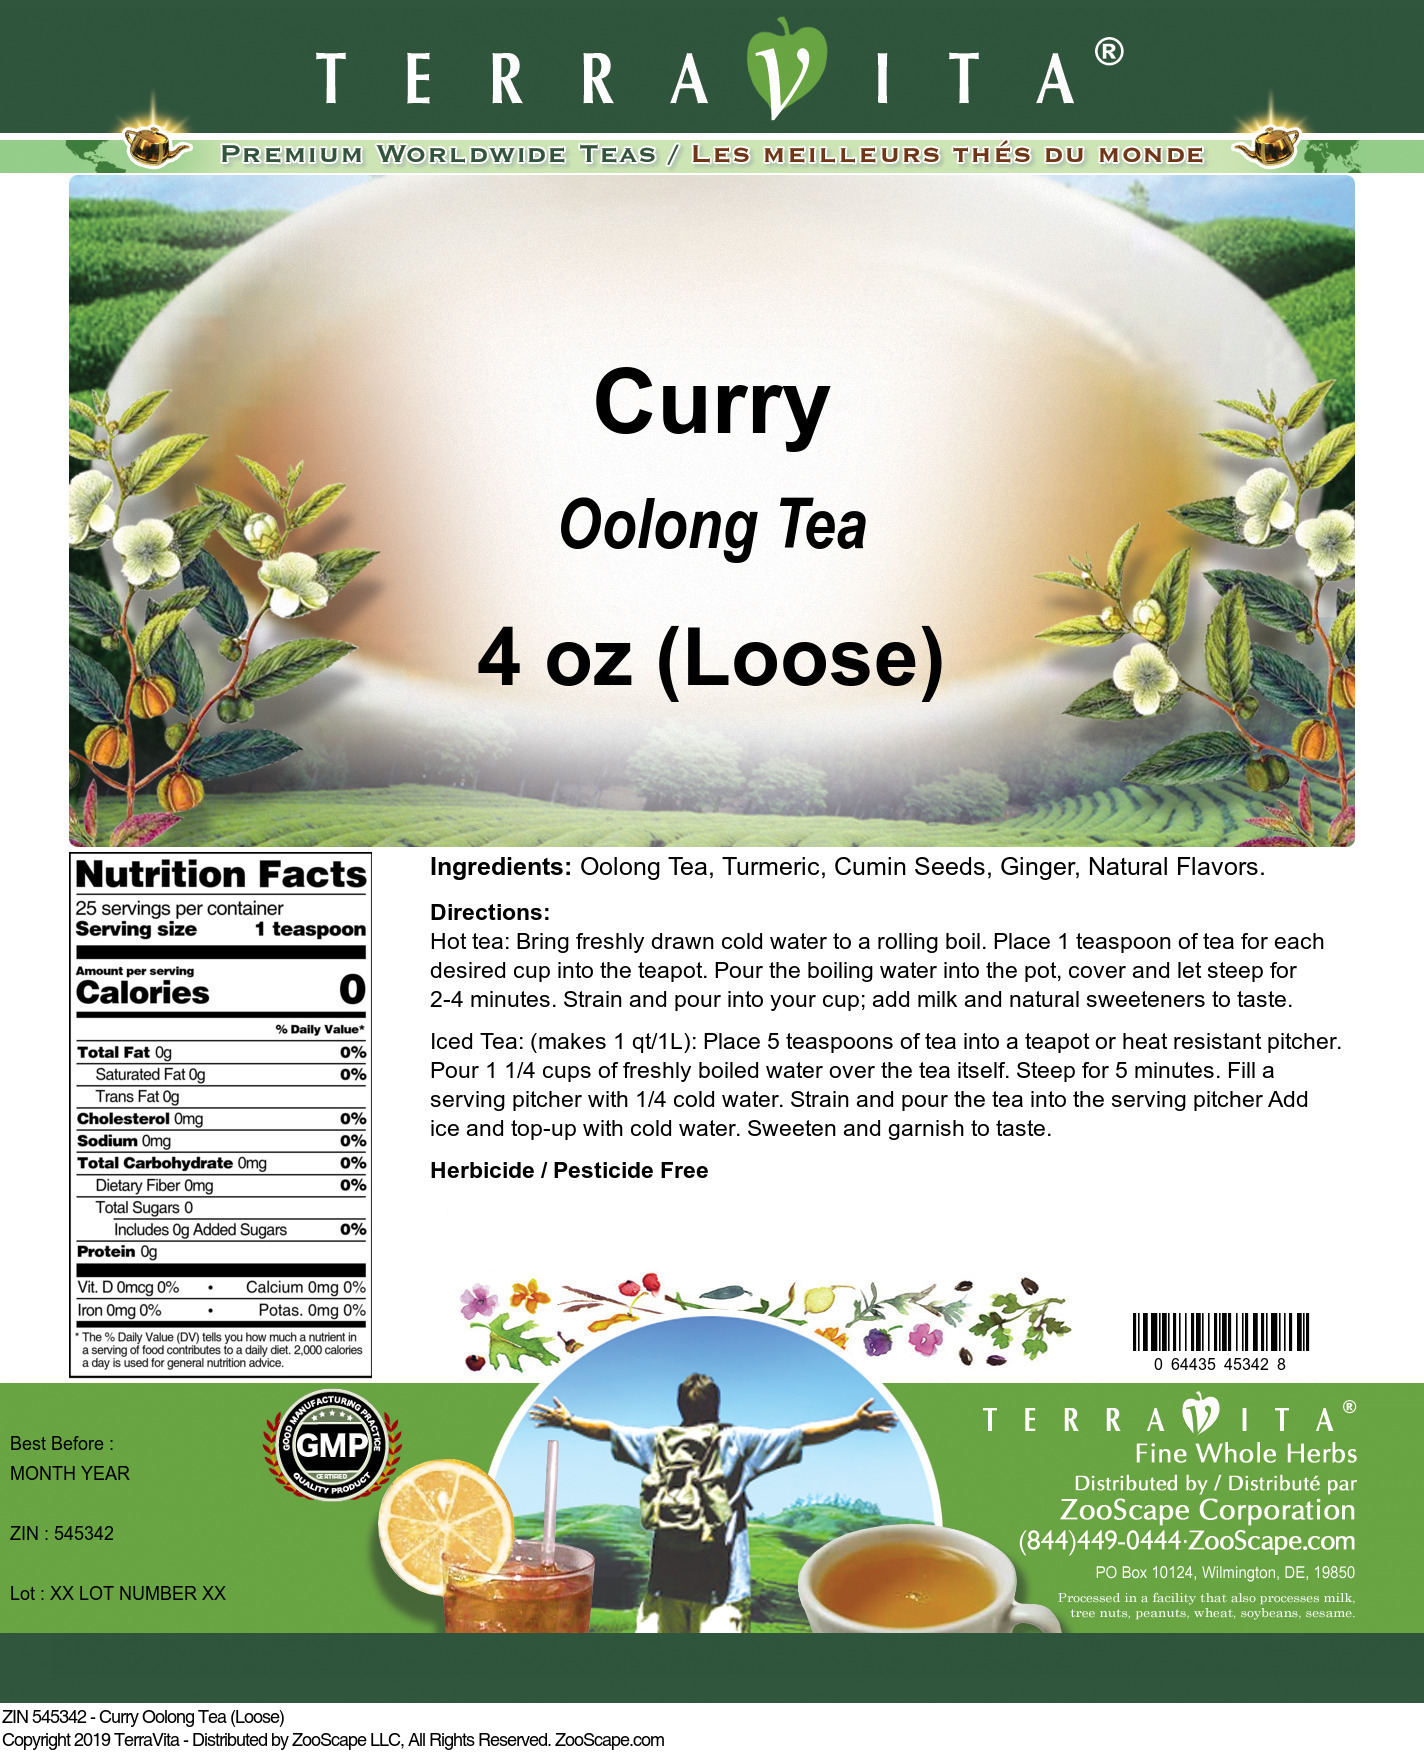 Curry Oolong Tea (Loose) - Label